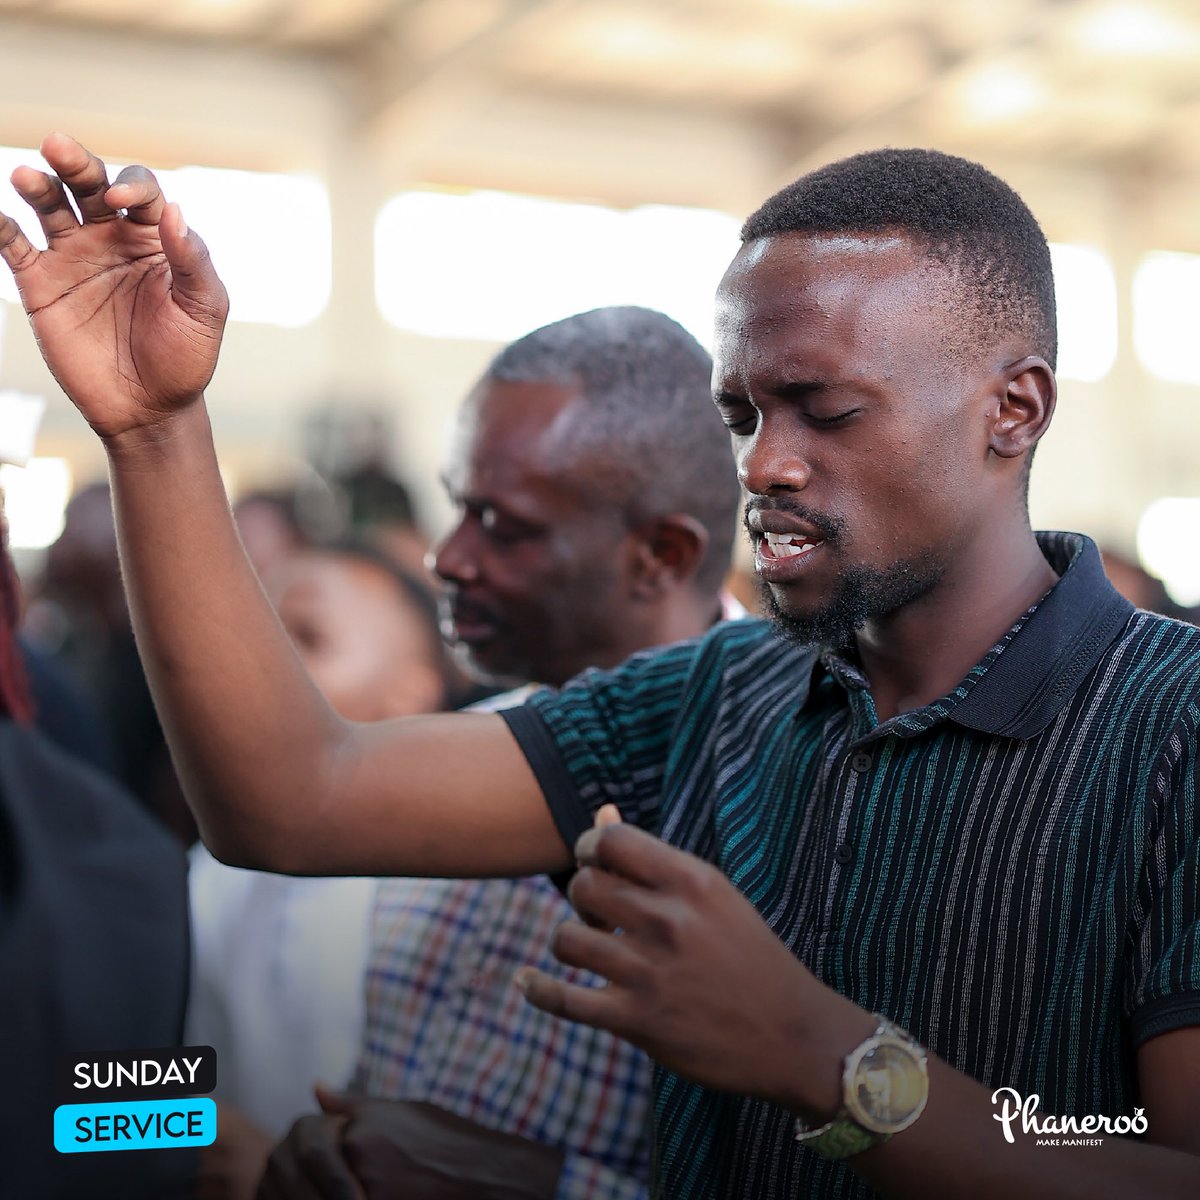 From the rising of the sun to the setting of the same, may Your Name alone be praised. You're the Great Jehovah, THE GREAT I AM. bit.ly/PhanerooSunday… #Worship #PhanerooSundayService | #LiveNow